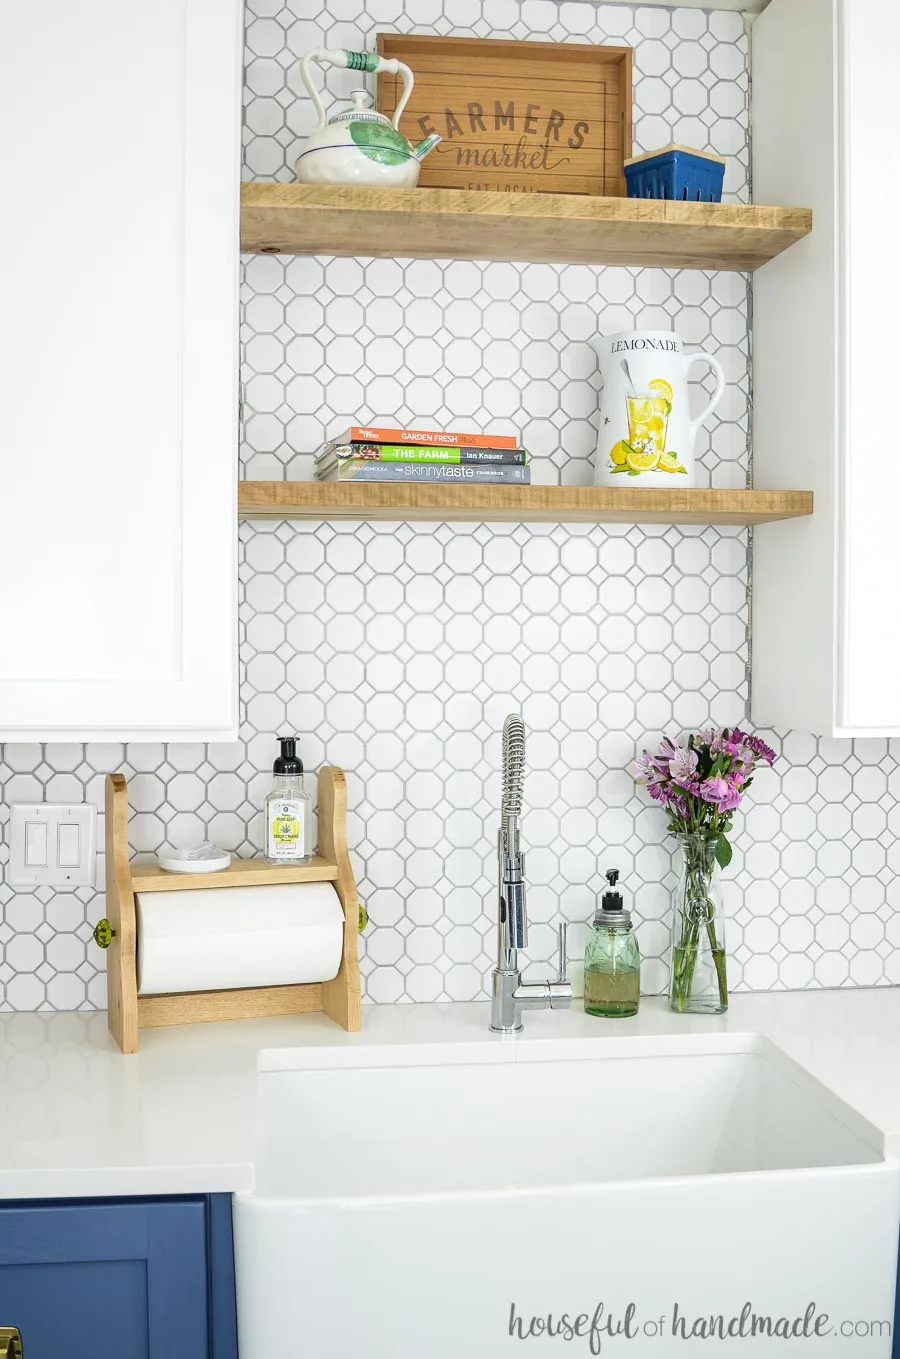 DIY farmhouse paper towel holder shown with farmers market tray on shelves